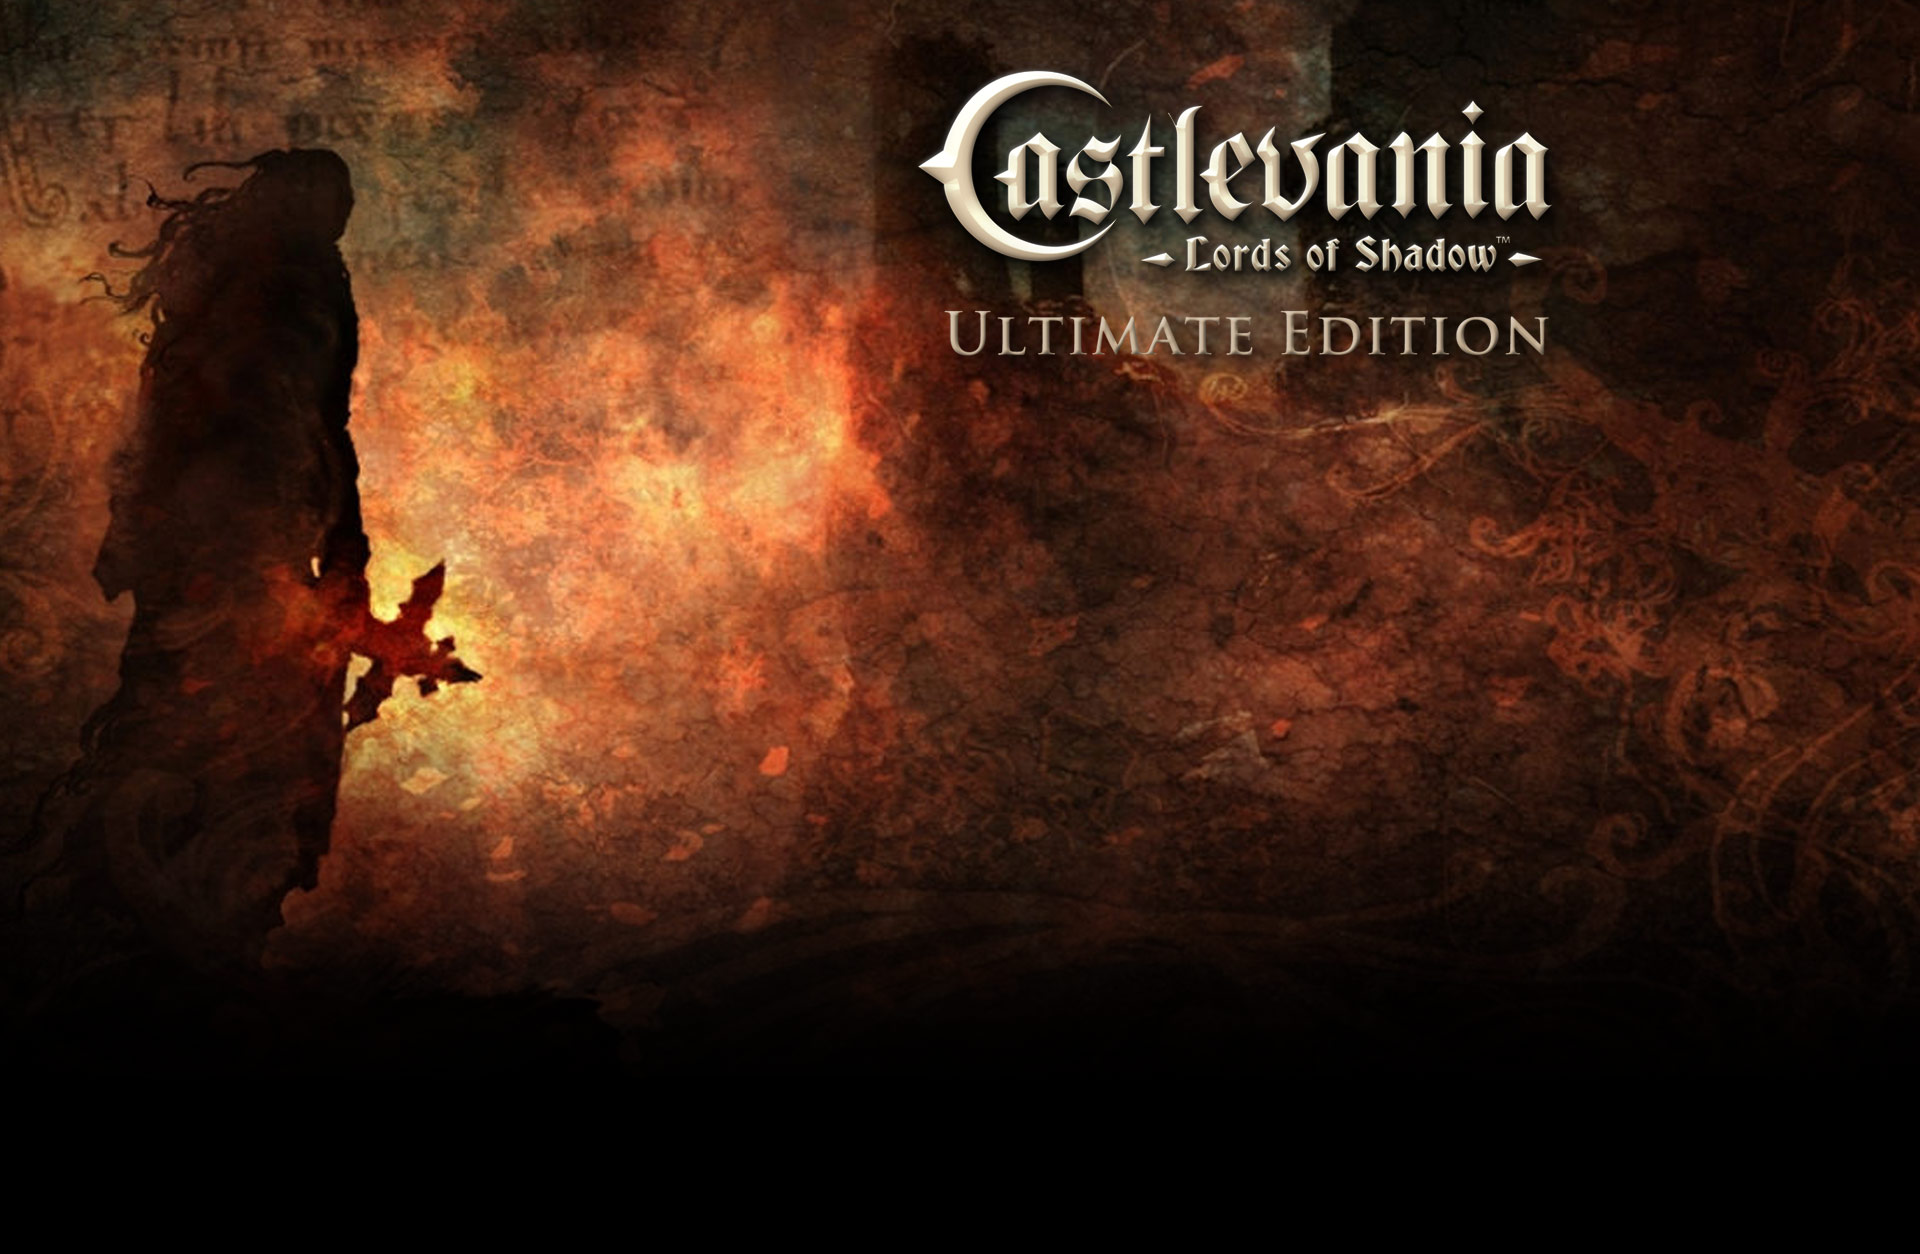 castlevania lords of shadow 1 pc free